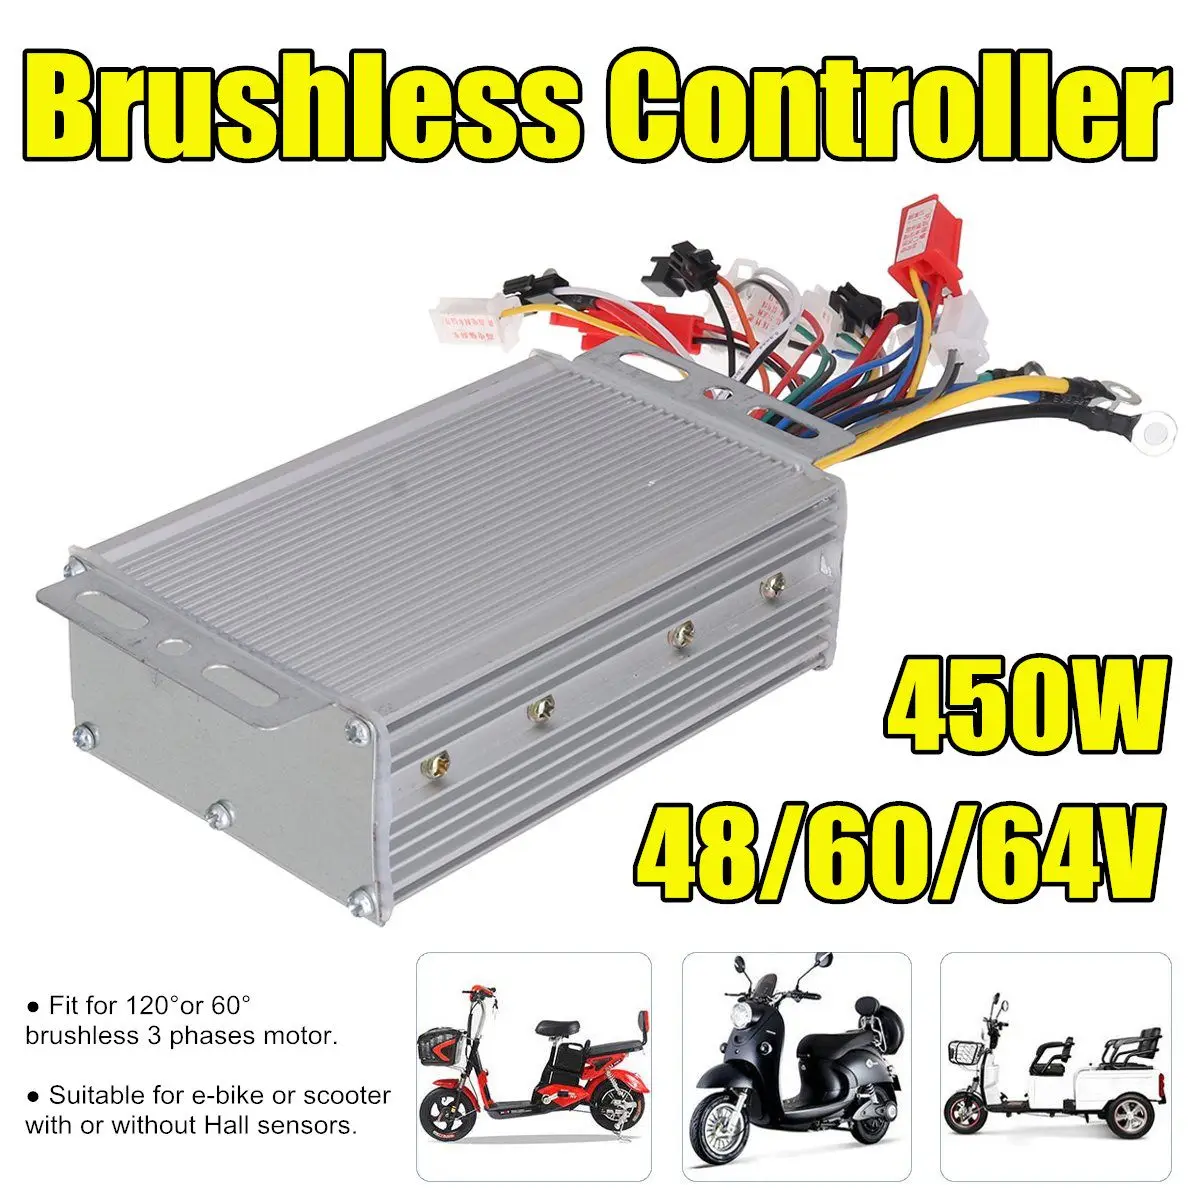 

450W Waterproof Intelligent Cruise Brushless Motor Controller for Electric Scooter Bicycle E-Bike Tricycle Controller 48/60/64V